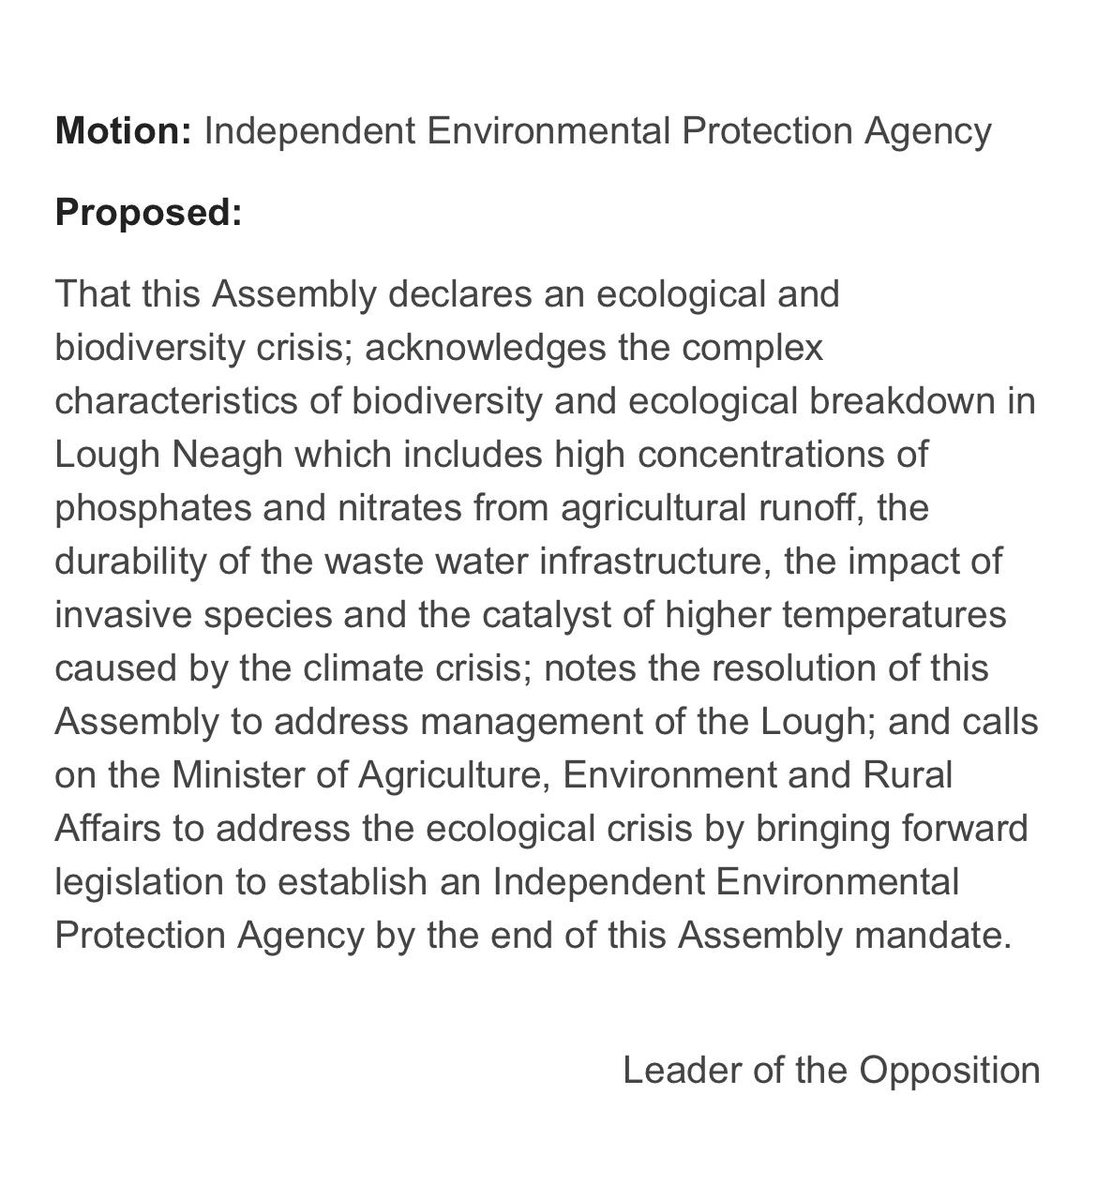 NEWS : important motion to be brought before Assembly next Monday by leader of the opposition. Please lobby your MLA asap to demand an Independent Environmental Protection Agency # epanow